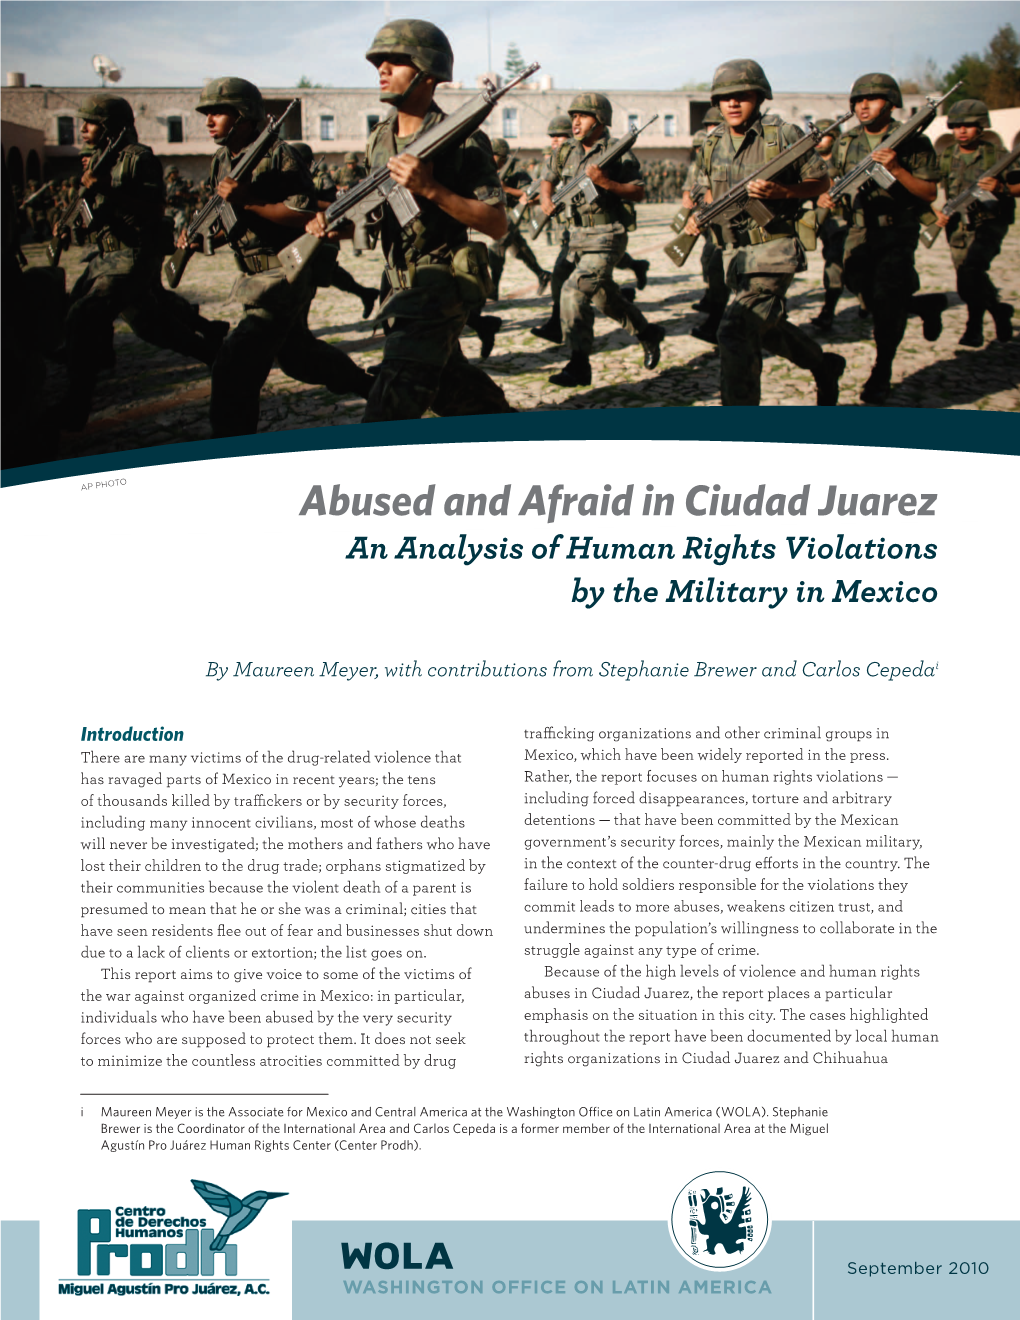 Abused and Afraid in Ciudad Juarez an Analysis of Human Rights Violations by the Military in Mexico